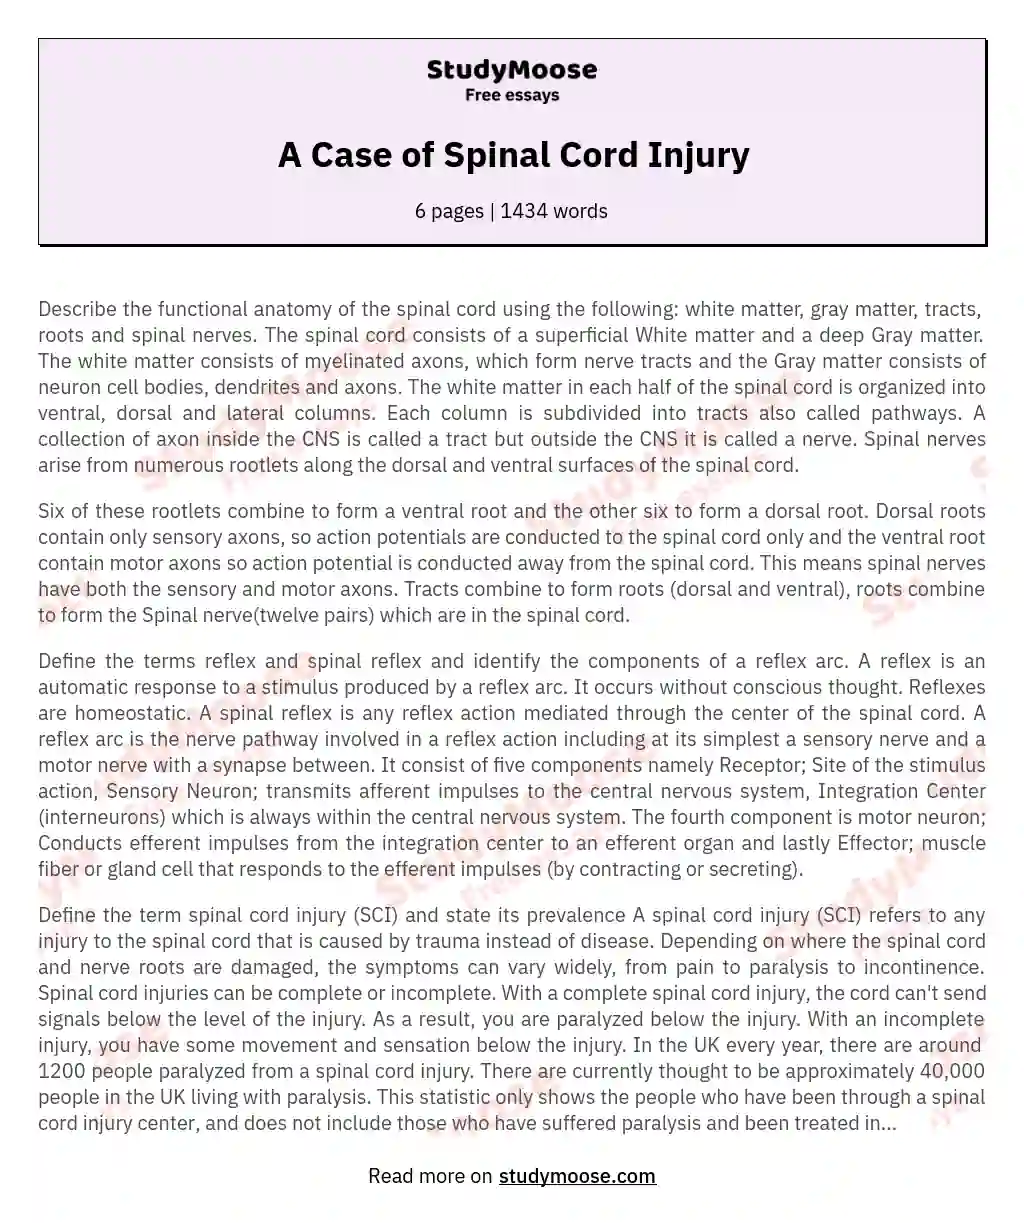 A Case of Spinal Cord Injury